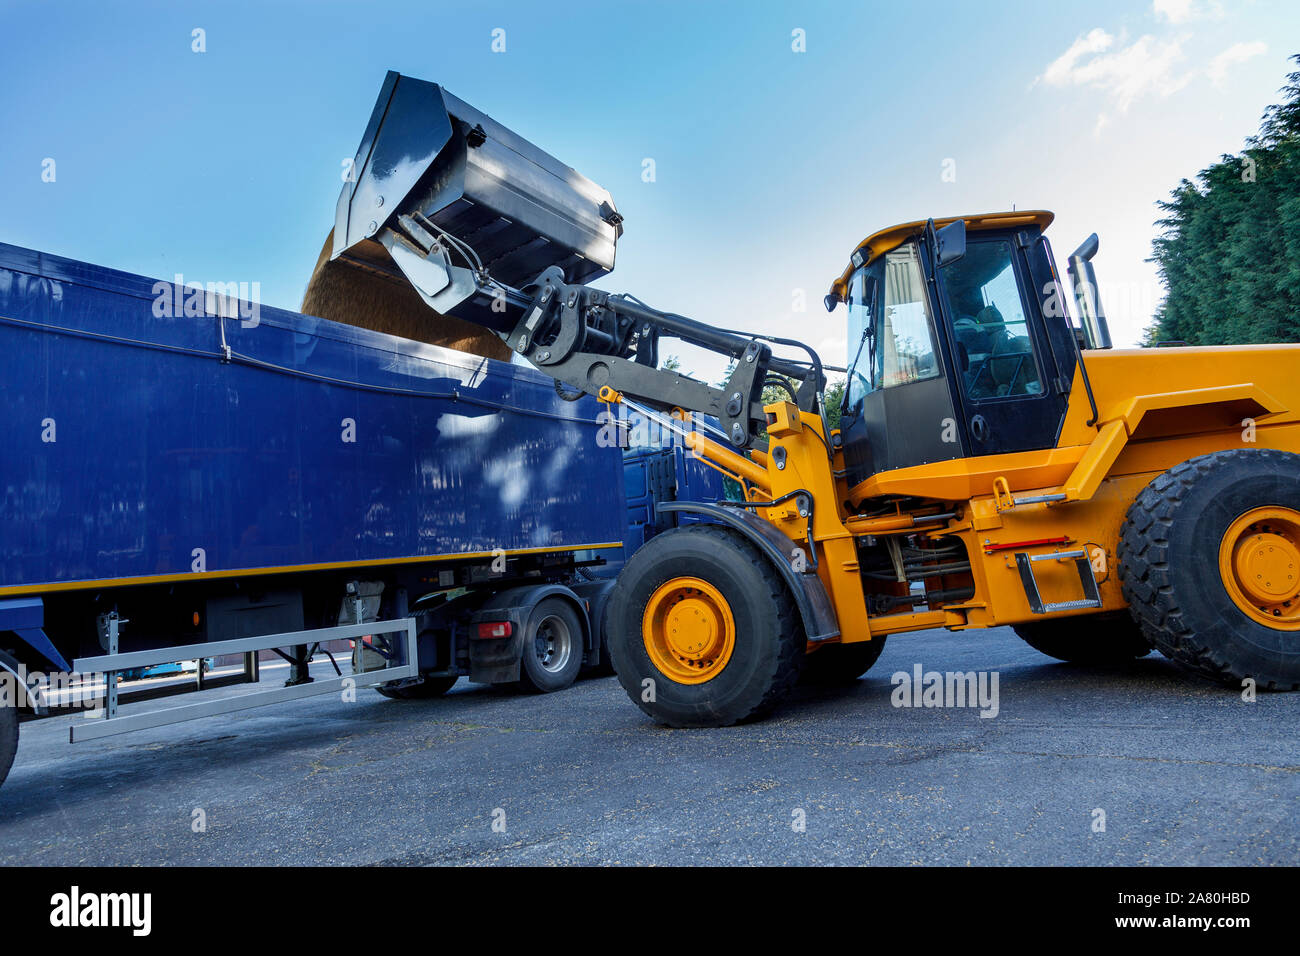 Yellow tractor dumping huge quantities of grain into the back of a articulated lorry, against a blue sky. Stock Photo